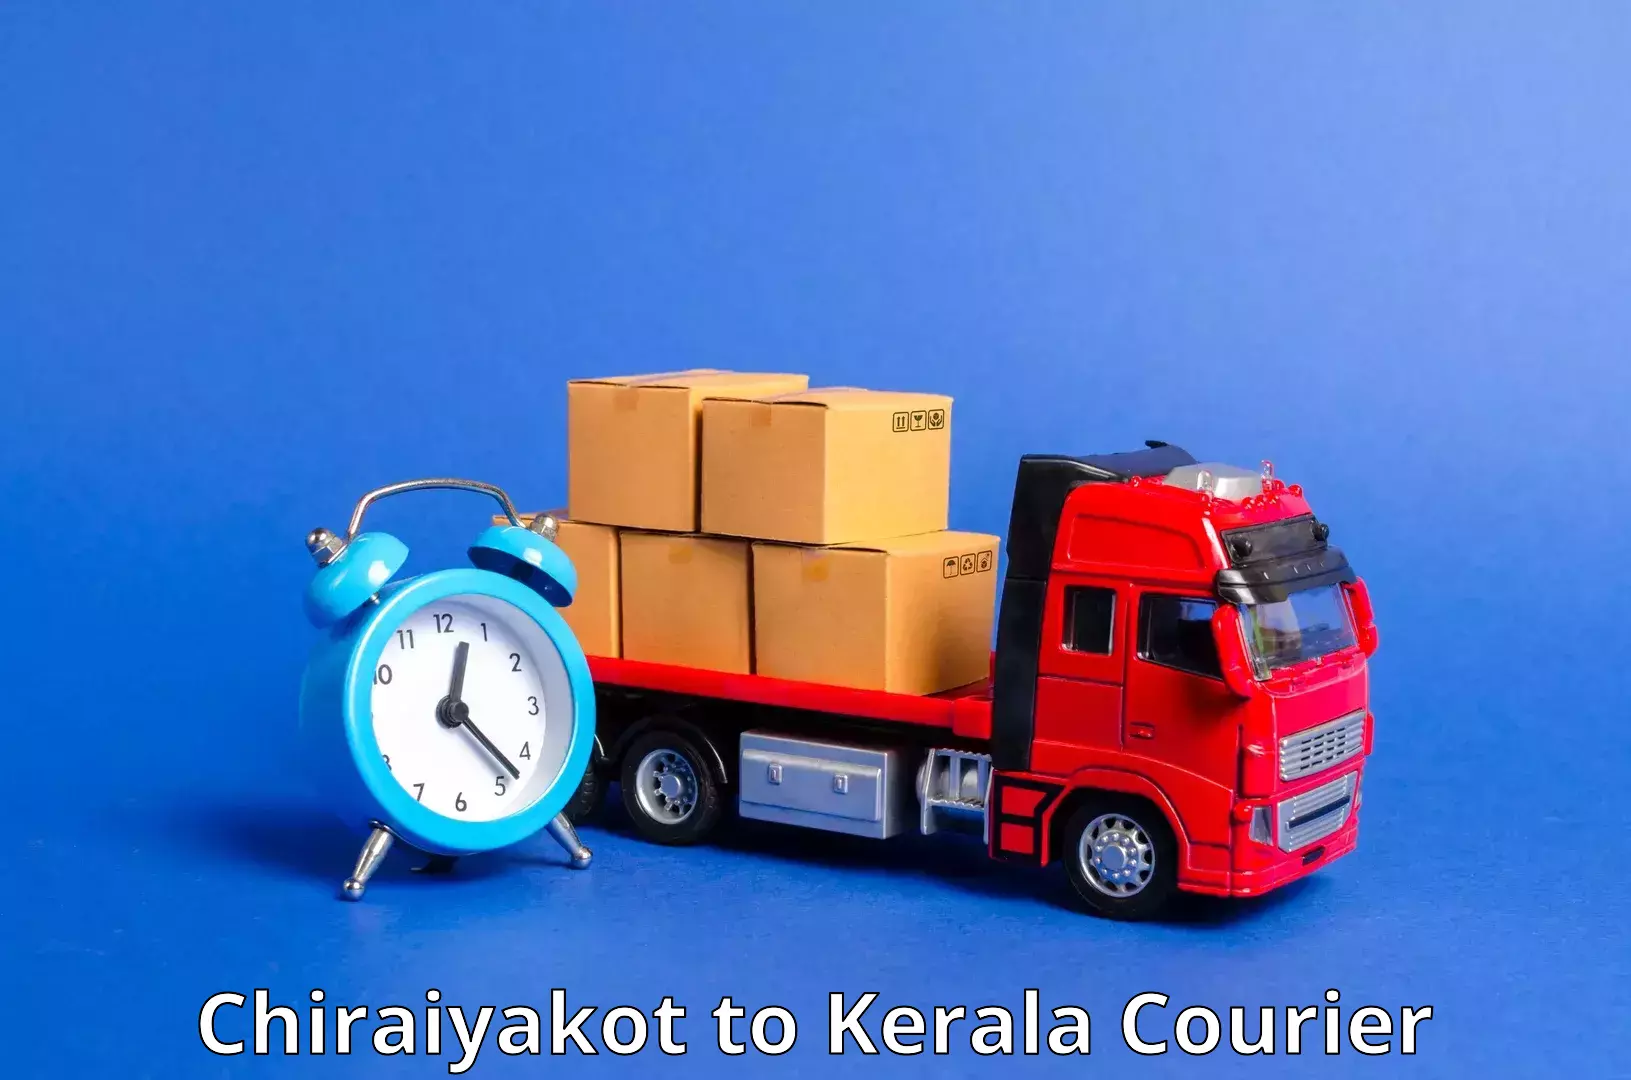 High-speed parcel service Chiraiyakot to Cochin University of Science and Technology